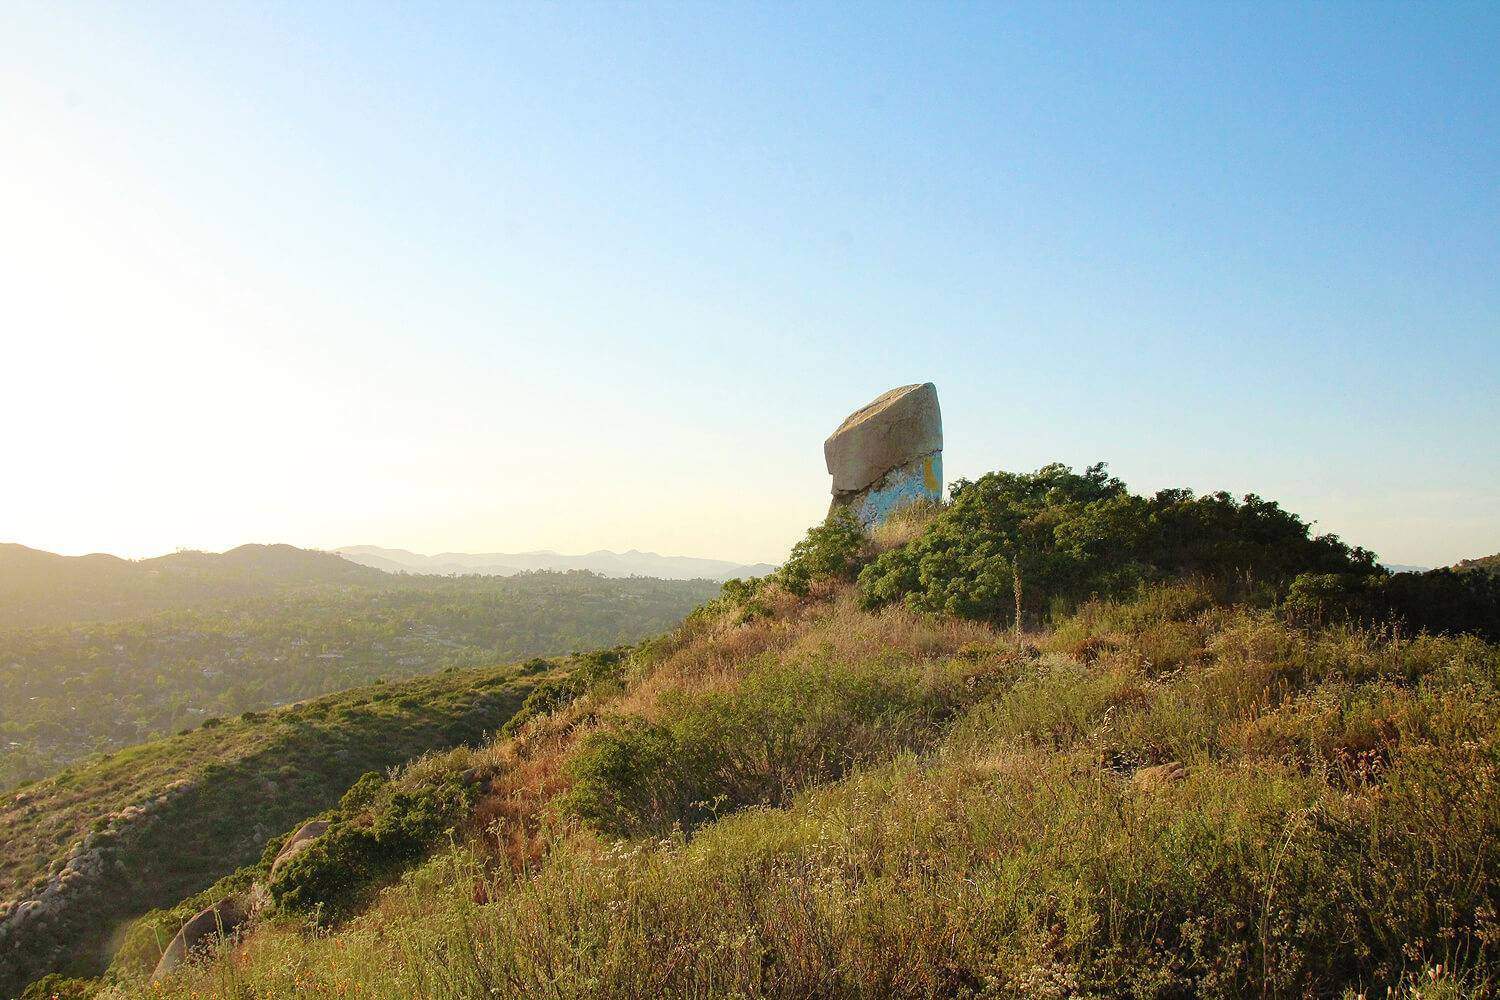 Hike to Tooth Rock, a boulder resembling a giant tooth in Poway!